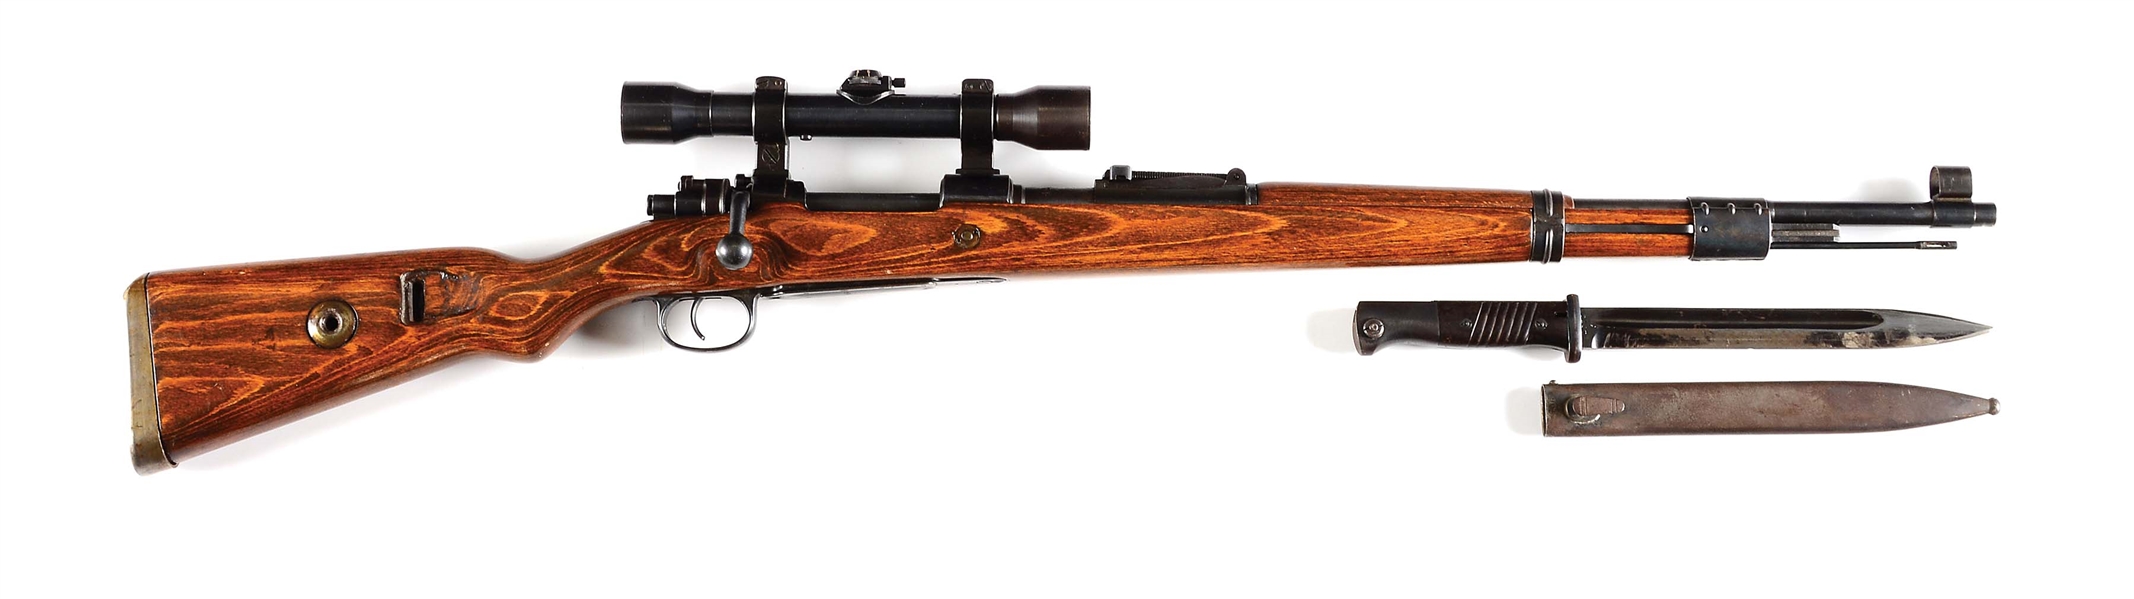 (C) EXCEPTIONAL & NEARLY ALL MATCHING GERMAN WORLD WAR II STEYR SINGLE-CLAW MOUNT K98K BOLT ACTION SNIPER RIFLE.